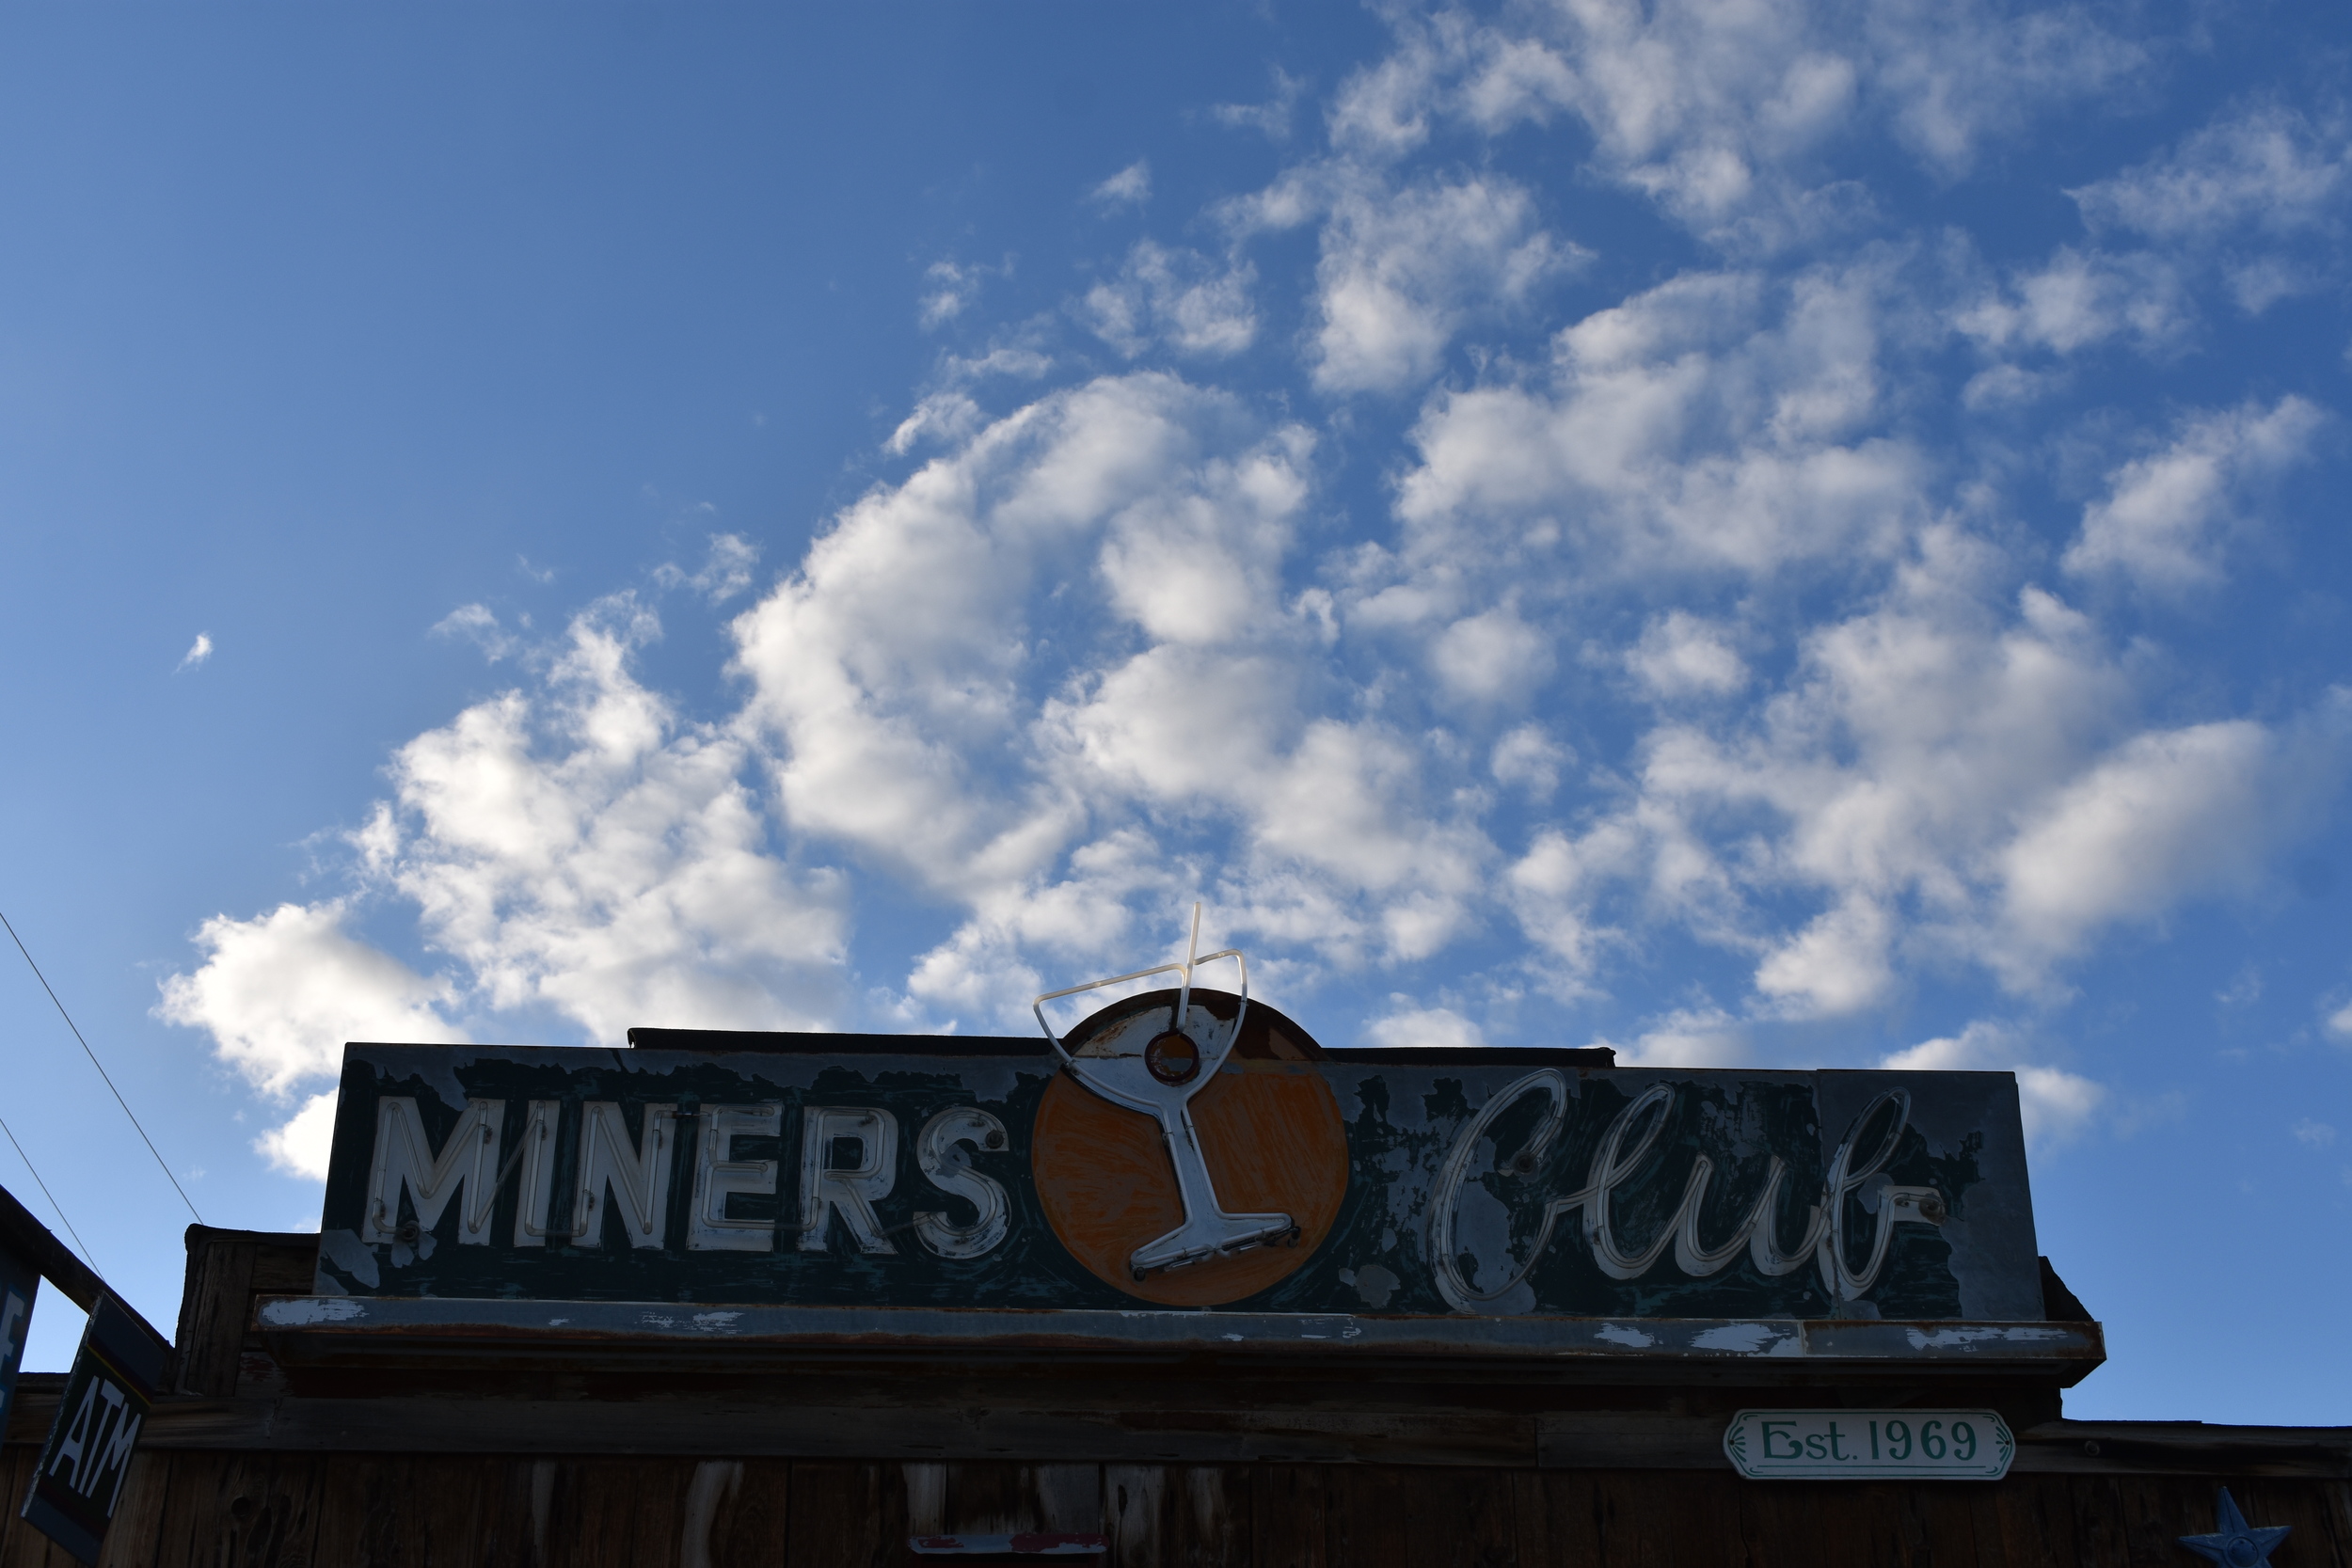 Miners Club wall and roof mounted signs, Gerlach, Nevada